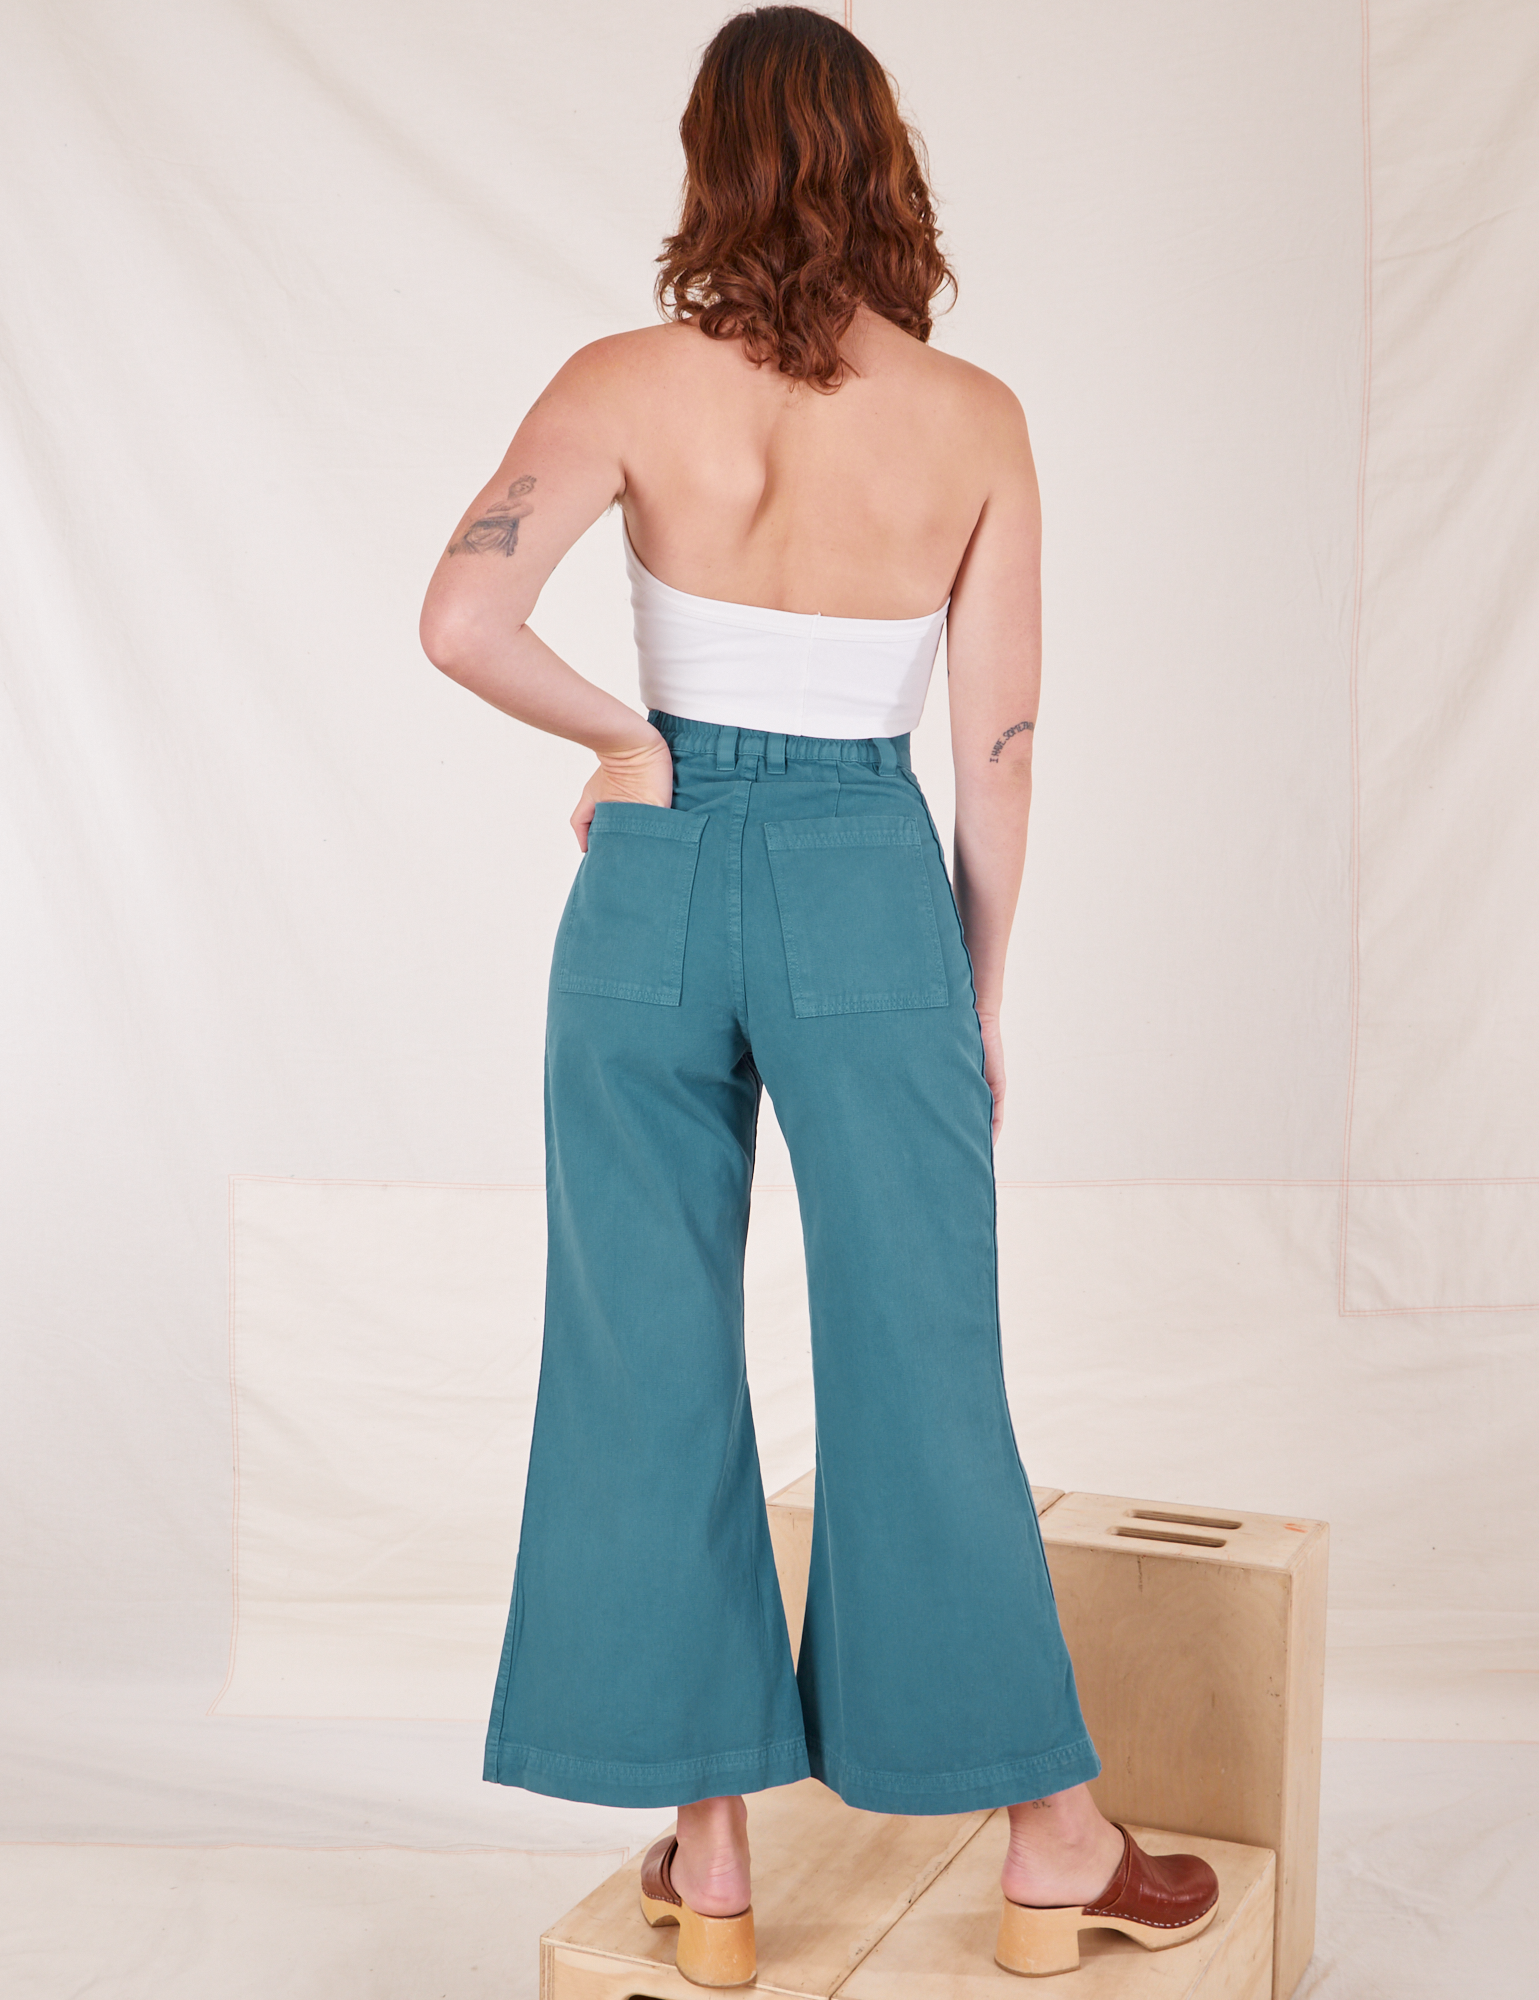 Back view of Bell Bottoms in Marine Blue and vintage off-white Halter Top on Alex